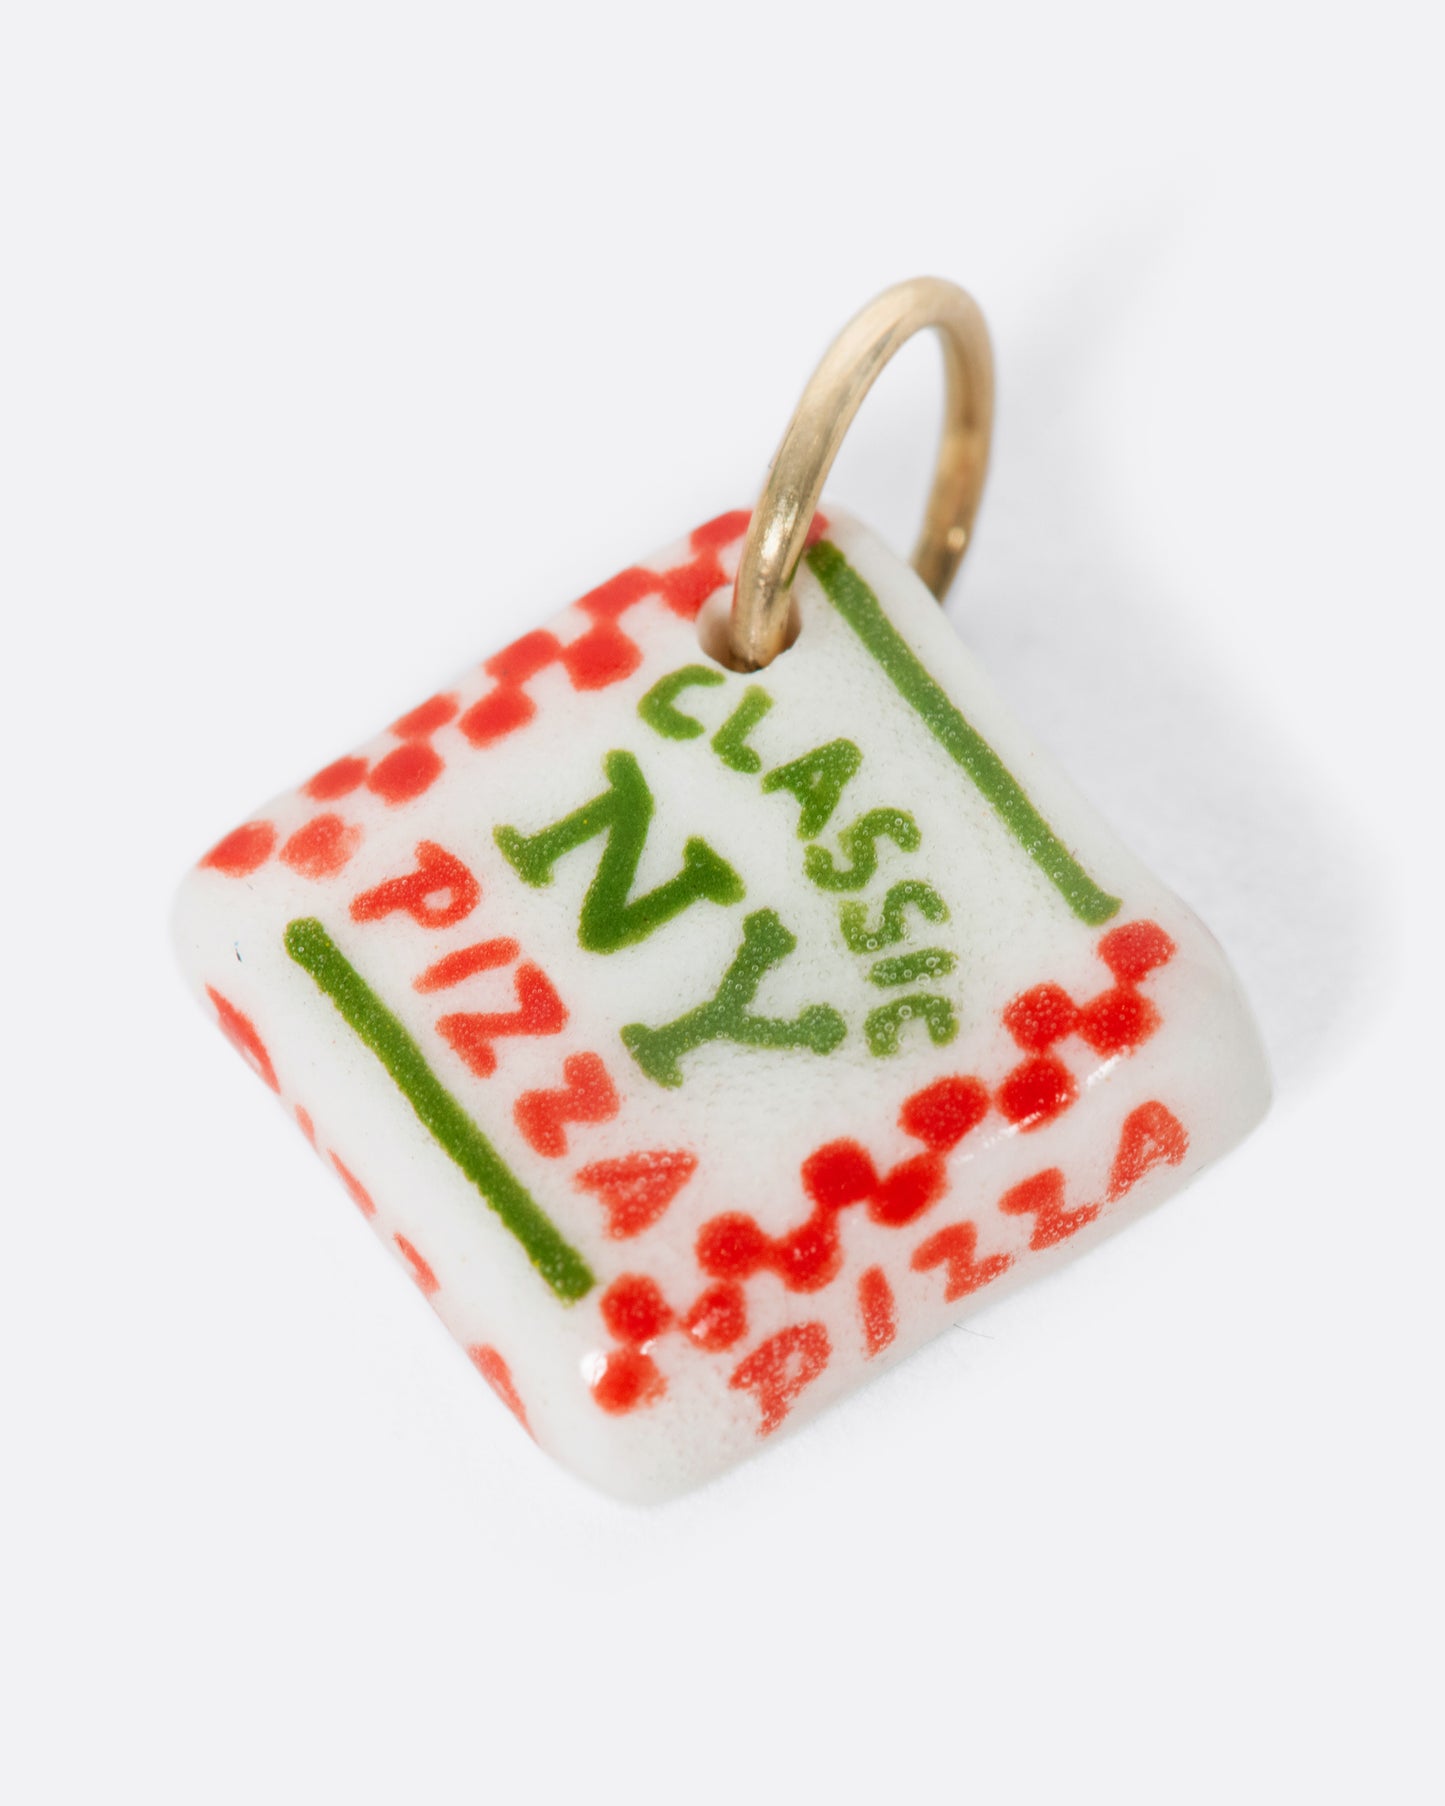 A white porcelain Classic New York pizza box charm with a yellow gold bail